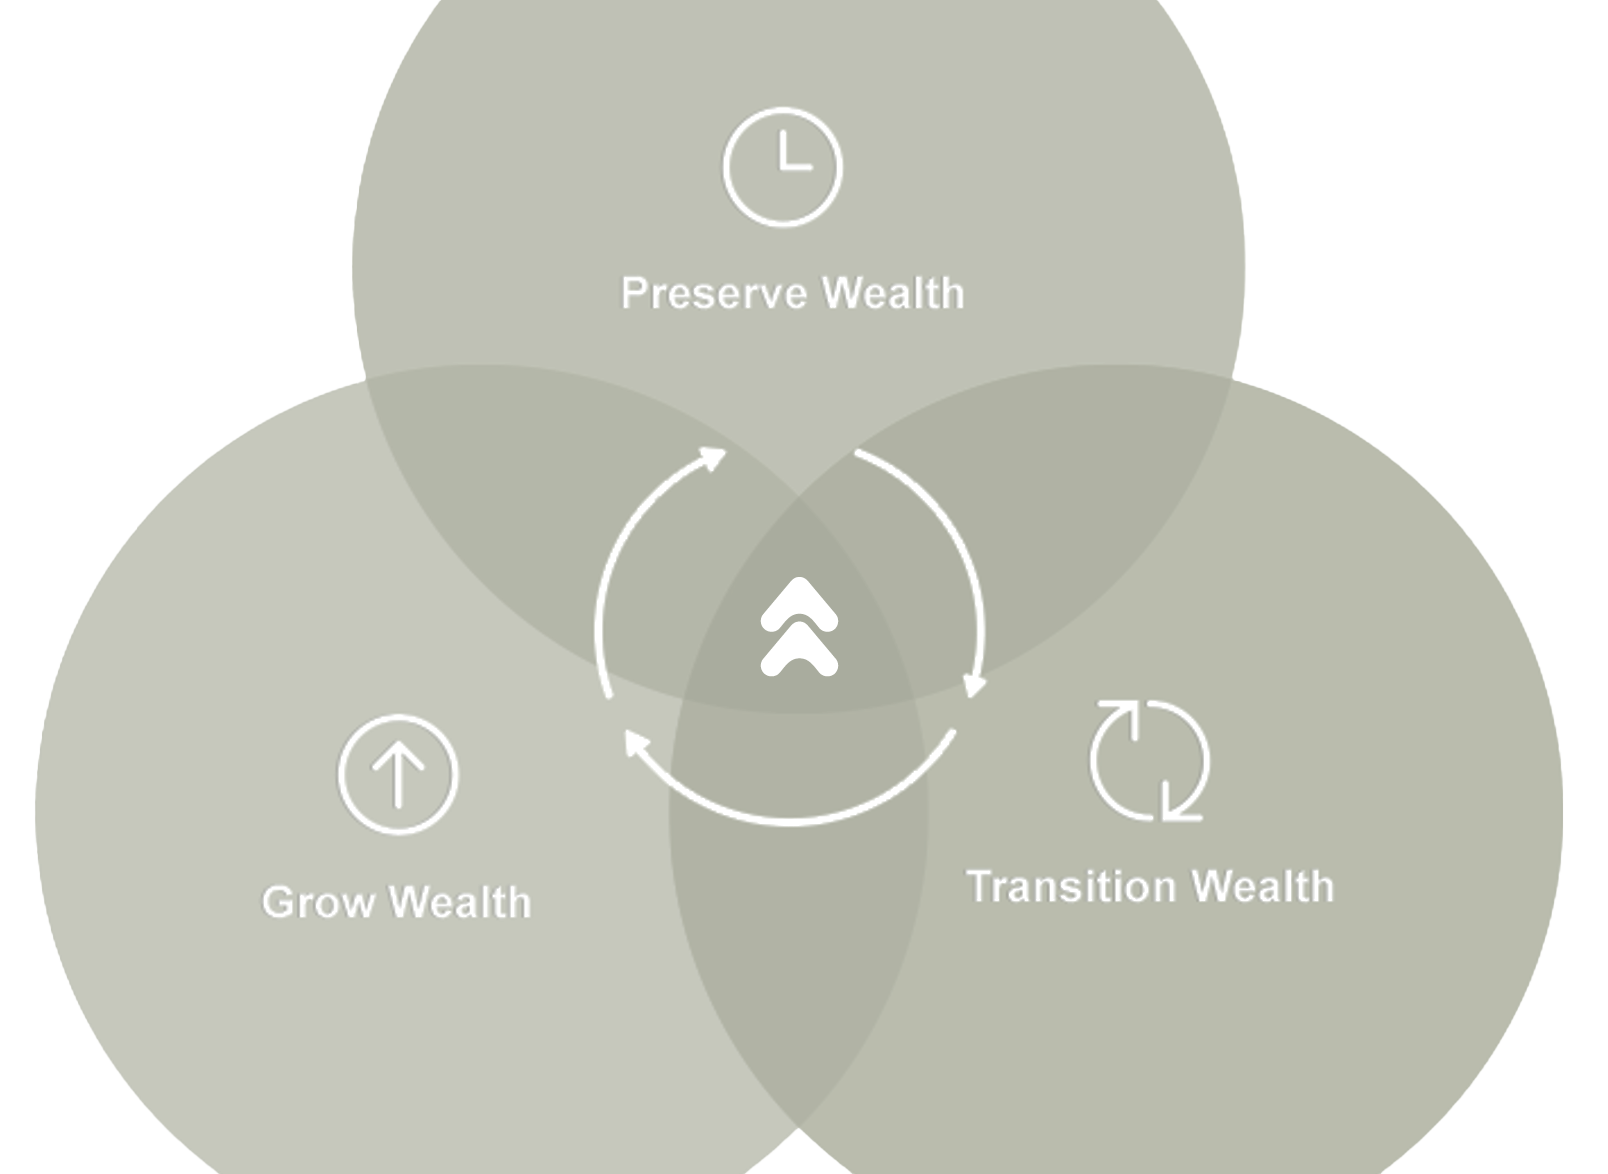 The Wealth Cycle